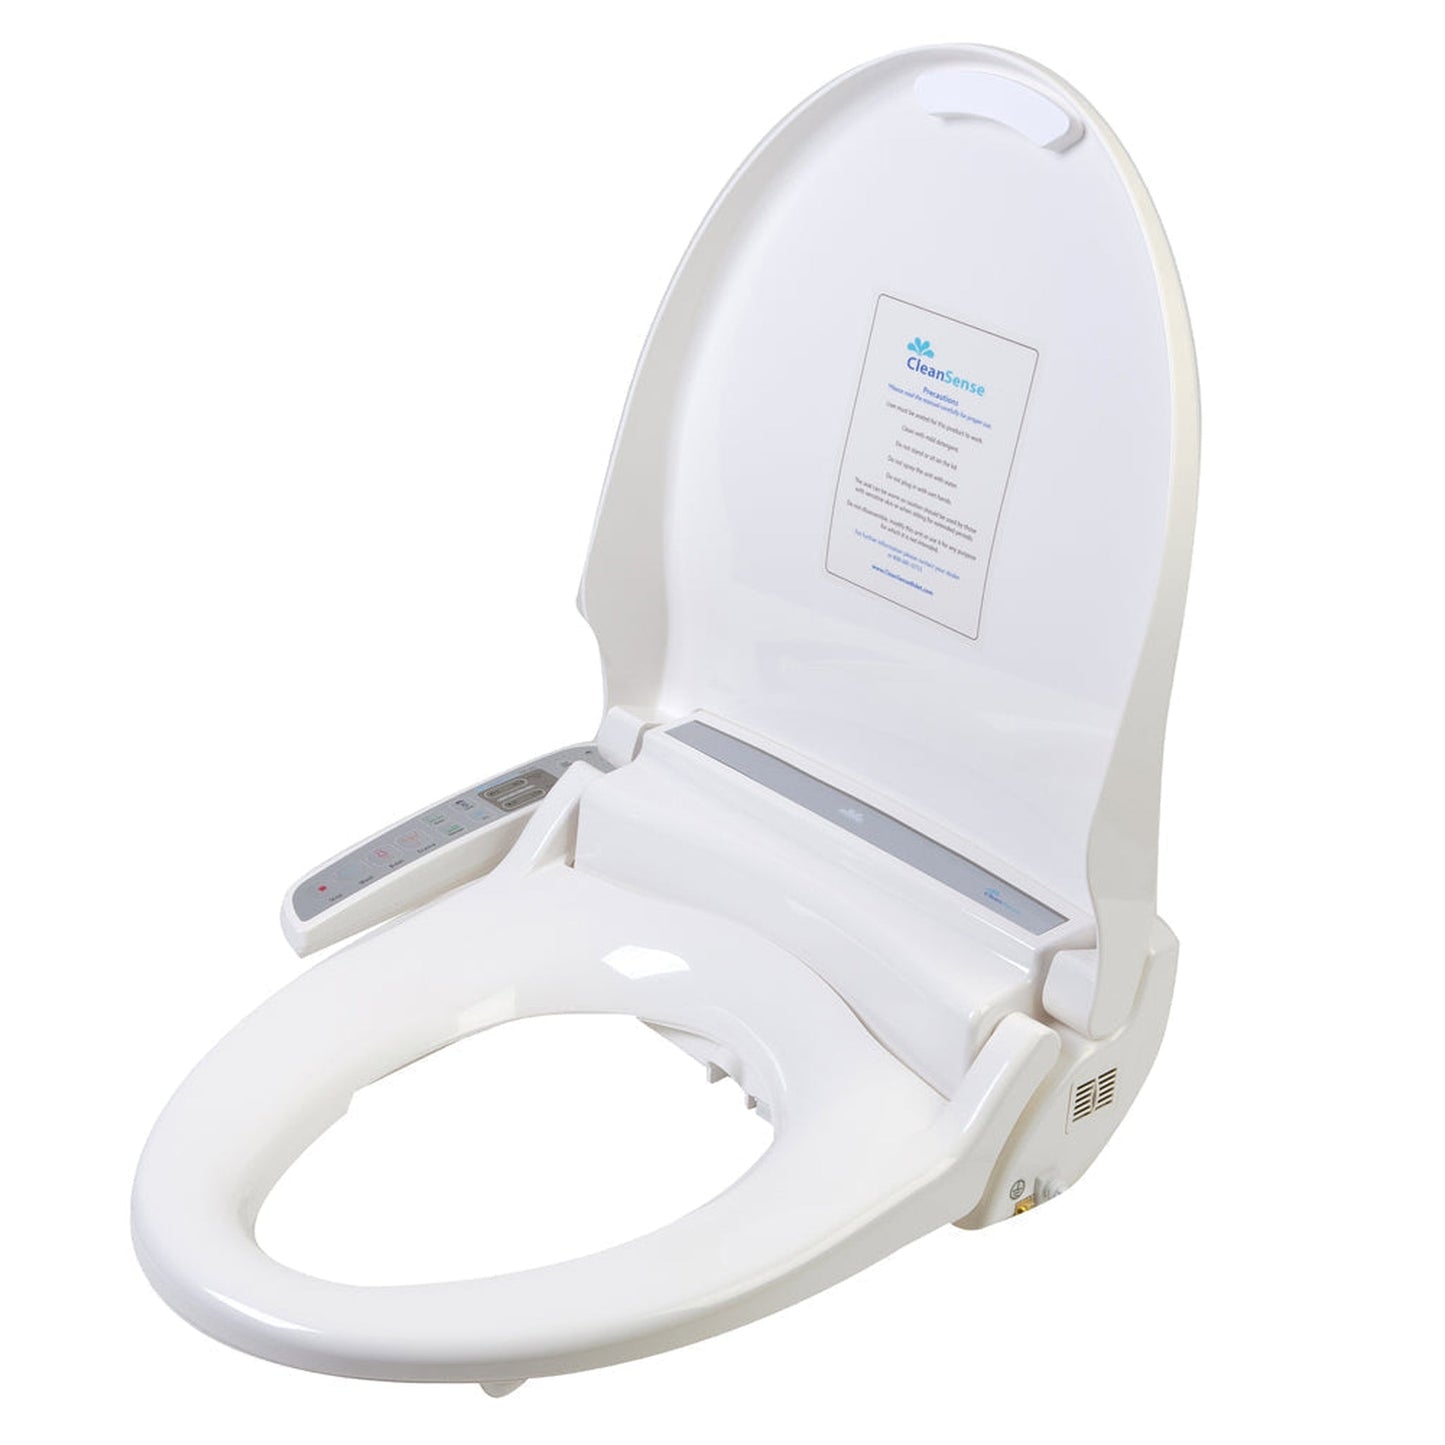 CleanSense DIB-1500-EW White Advanced Elongated Bidet Seat With Side Panel Control and Energy Efficient Water Heating System